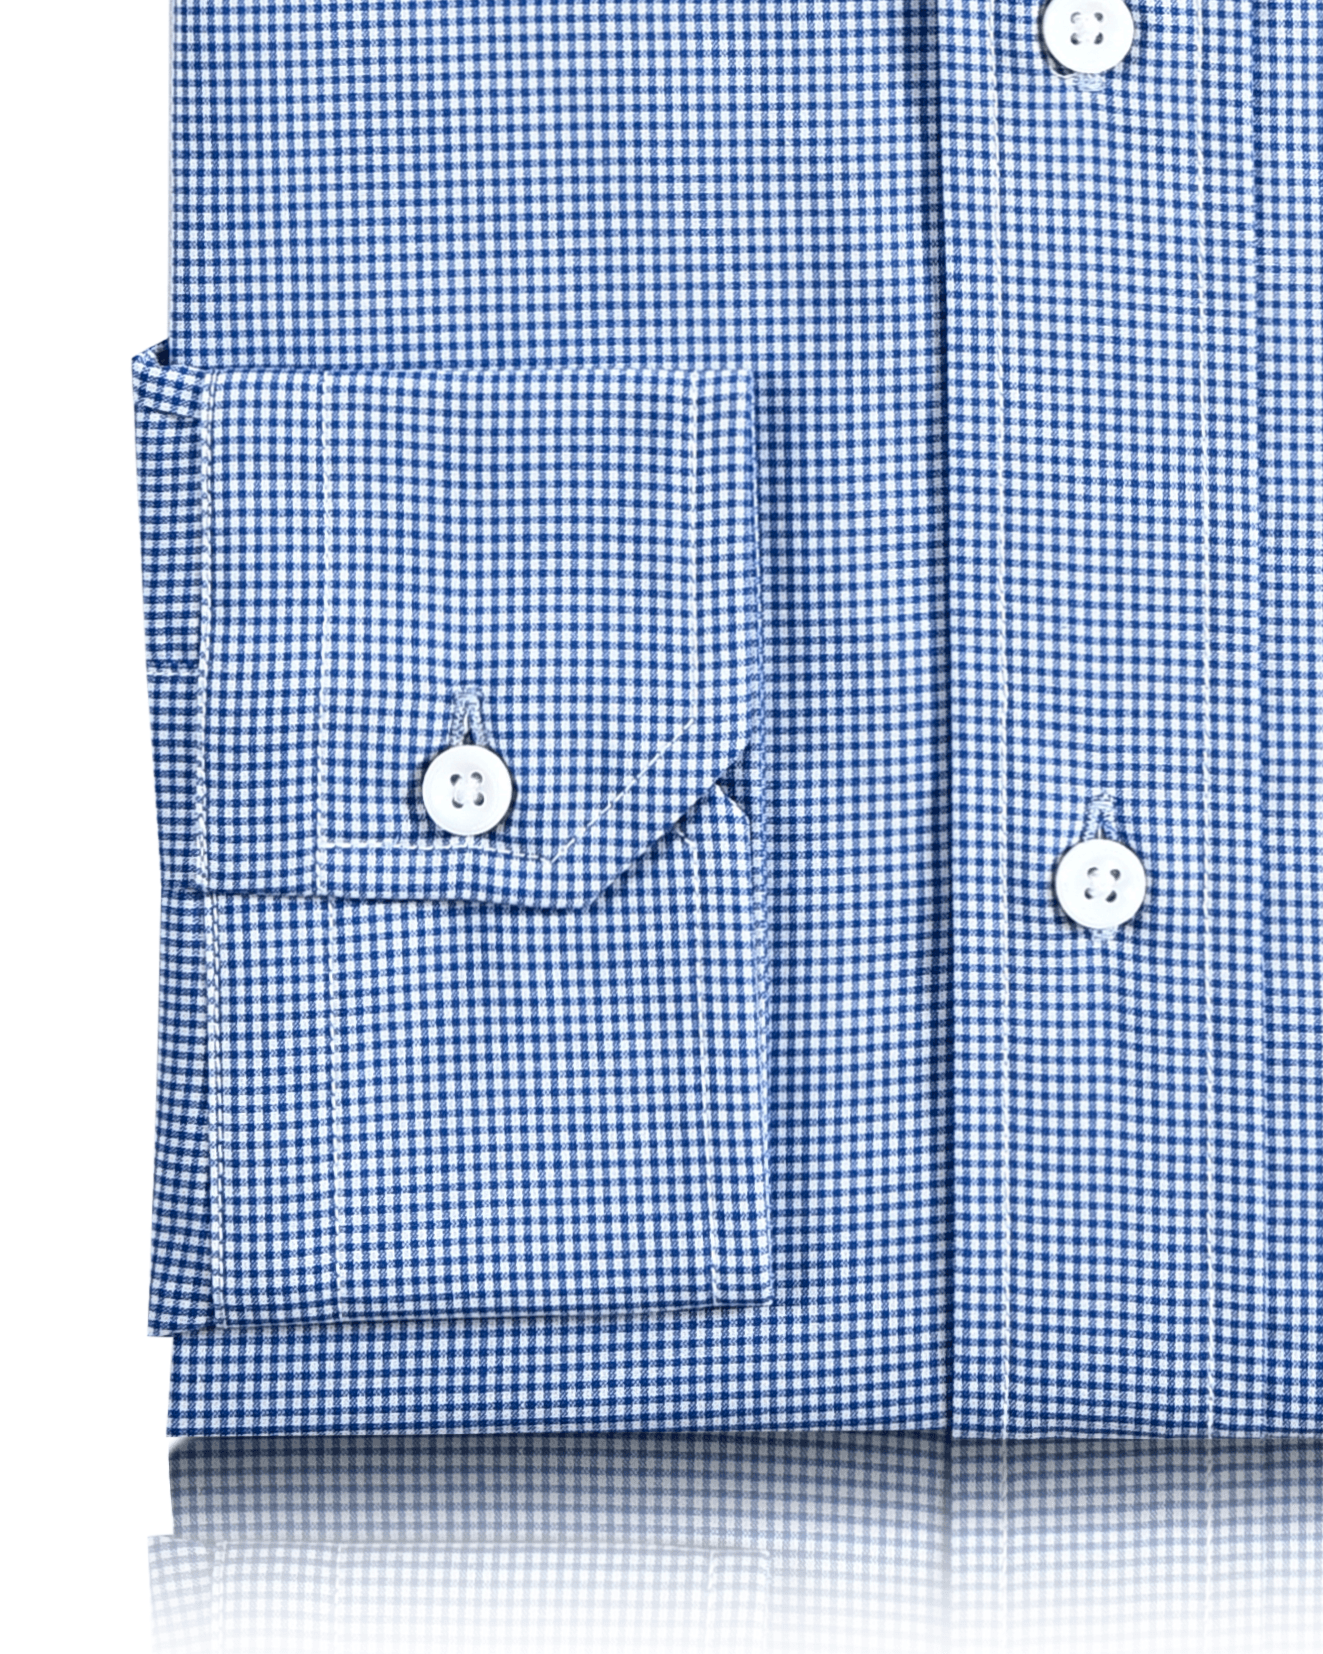 Close up view of custom check shirts for men by Luxire blue micro gingham